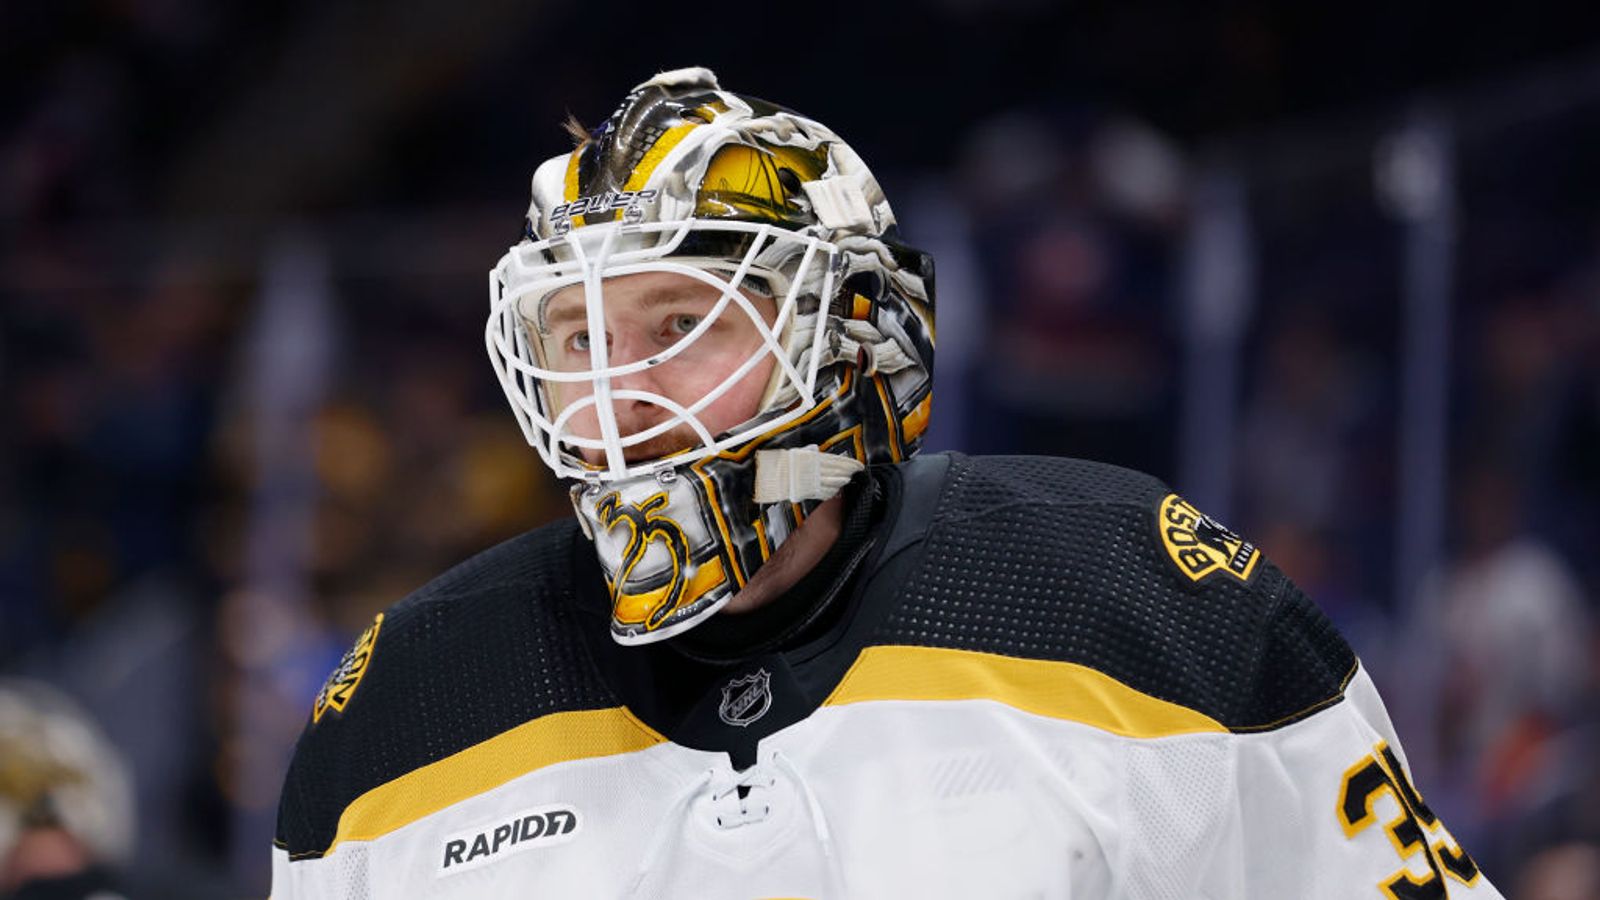 Are Bruins Looking For More Goalie Depth Before NHL Trade Deadline?